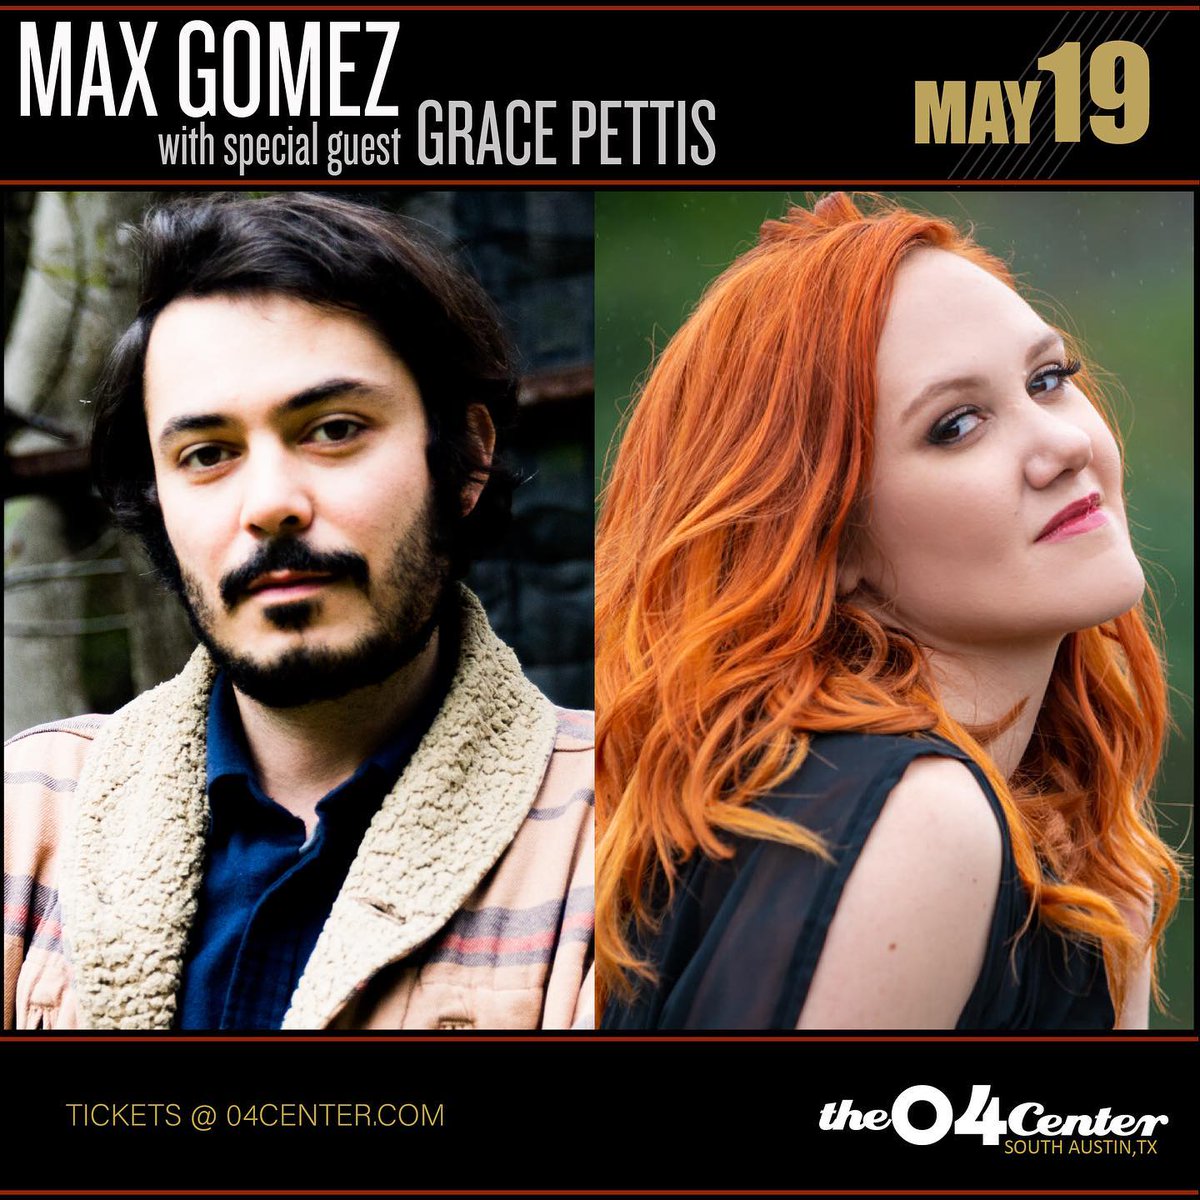 This weekend in #Austin, TX @GracePettis will perform at the @04Center with Max Gomez. Tickets are on sale now! 🎤🎶 Grab yours at prekindle.com/event/96753-ma… & check out gracepettis.com for future performances!